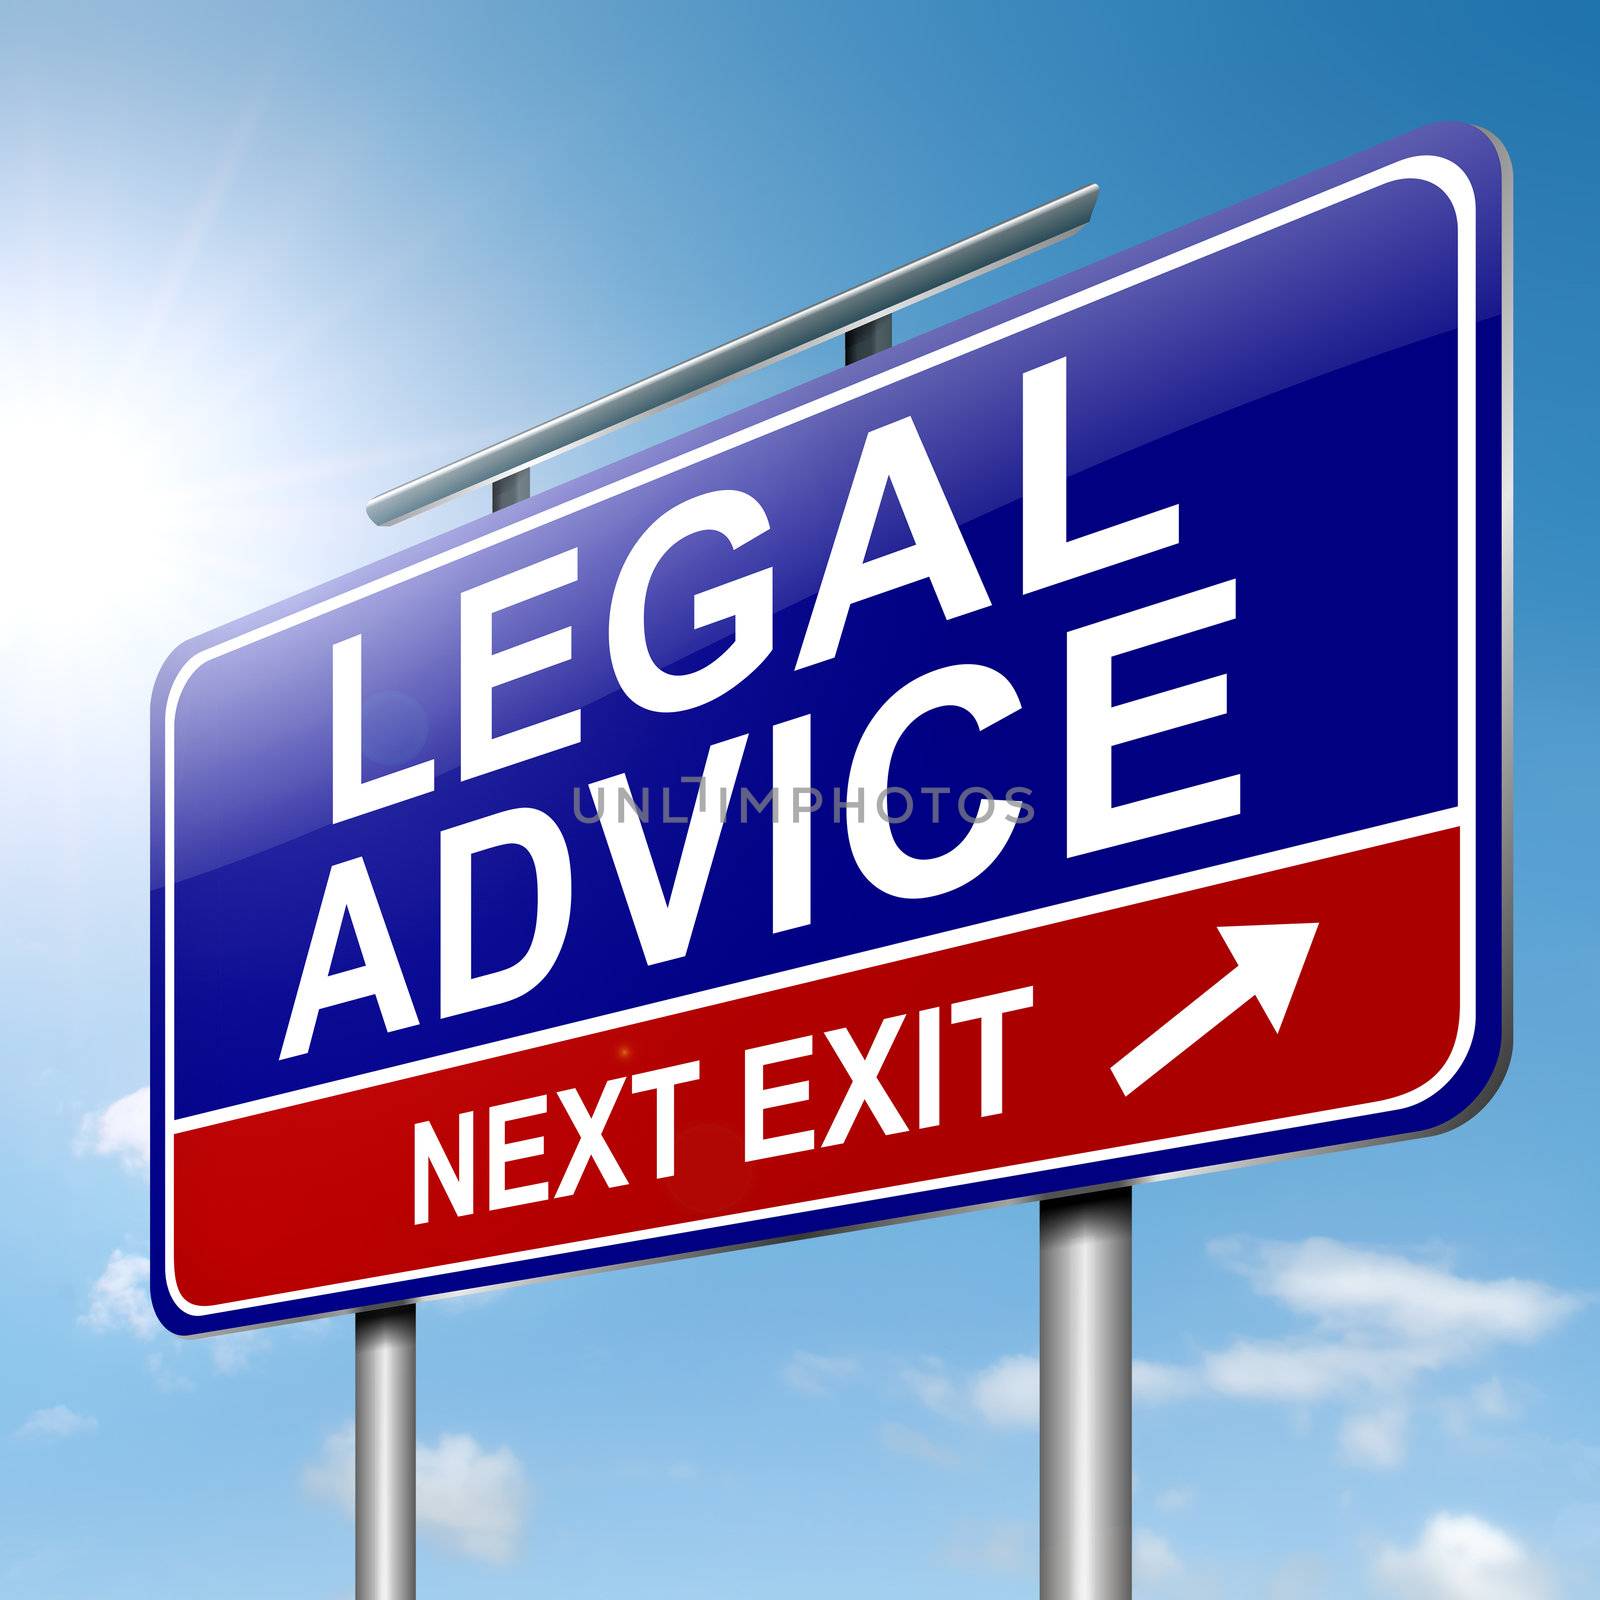 Legal advice. by 72soul